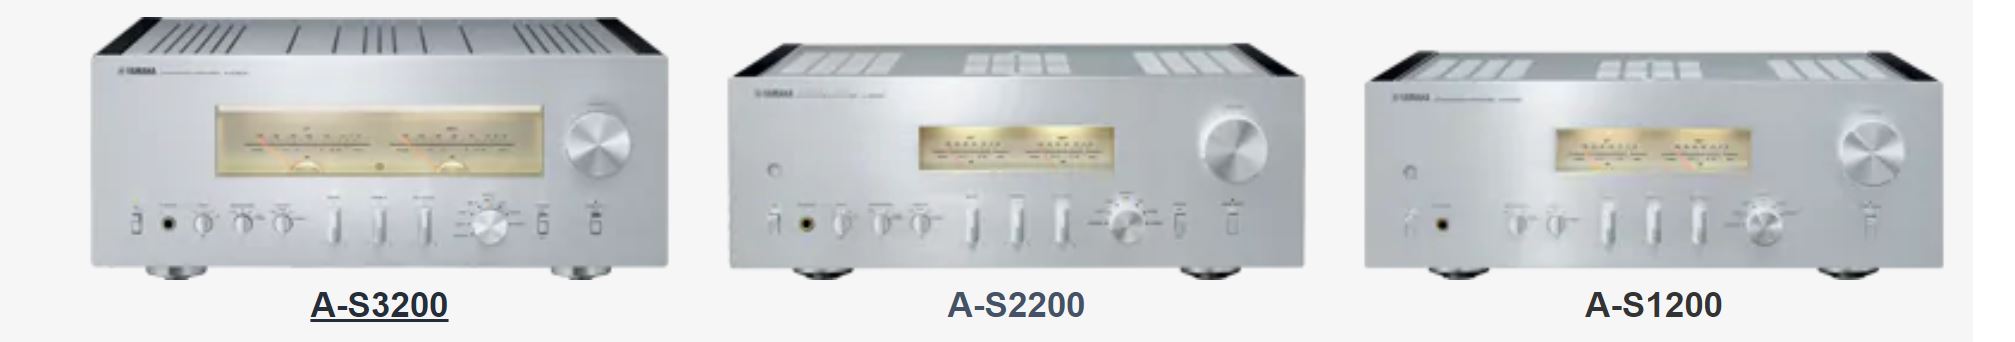 A S3200 and all A S series amplifiers Yamaha Expands Hi Fi Family With A S Amplifiers & NS 3000 Speakers